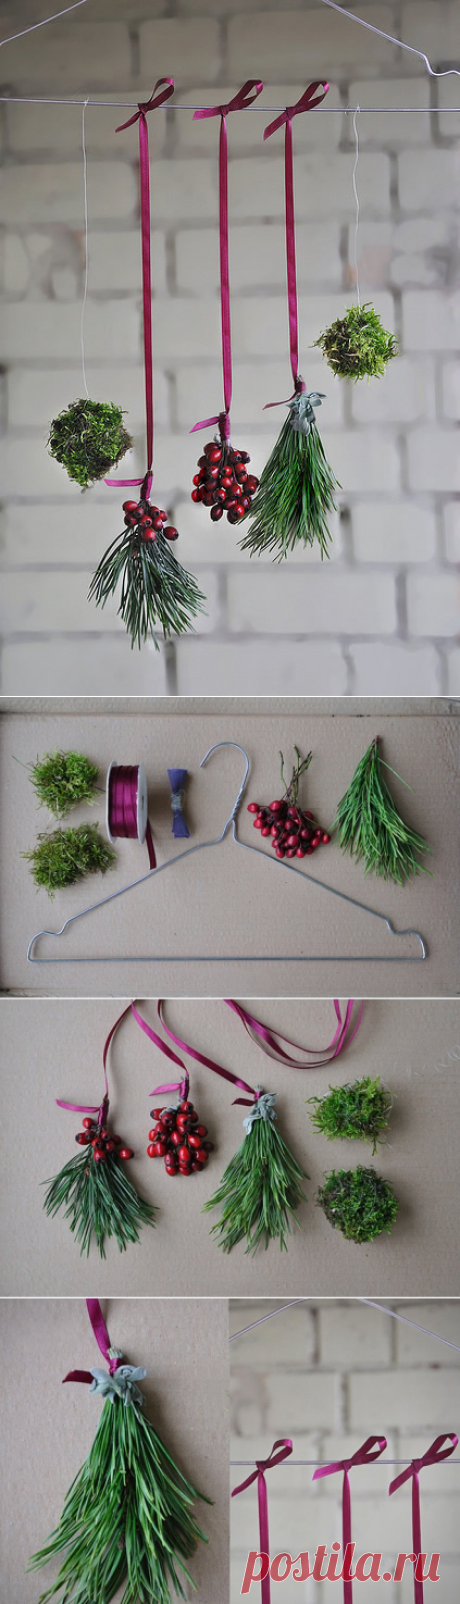 DIY Christmas decorations for your holiday home